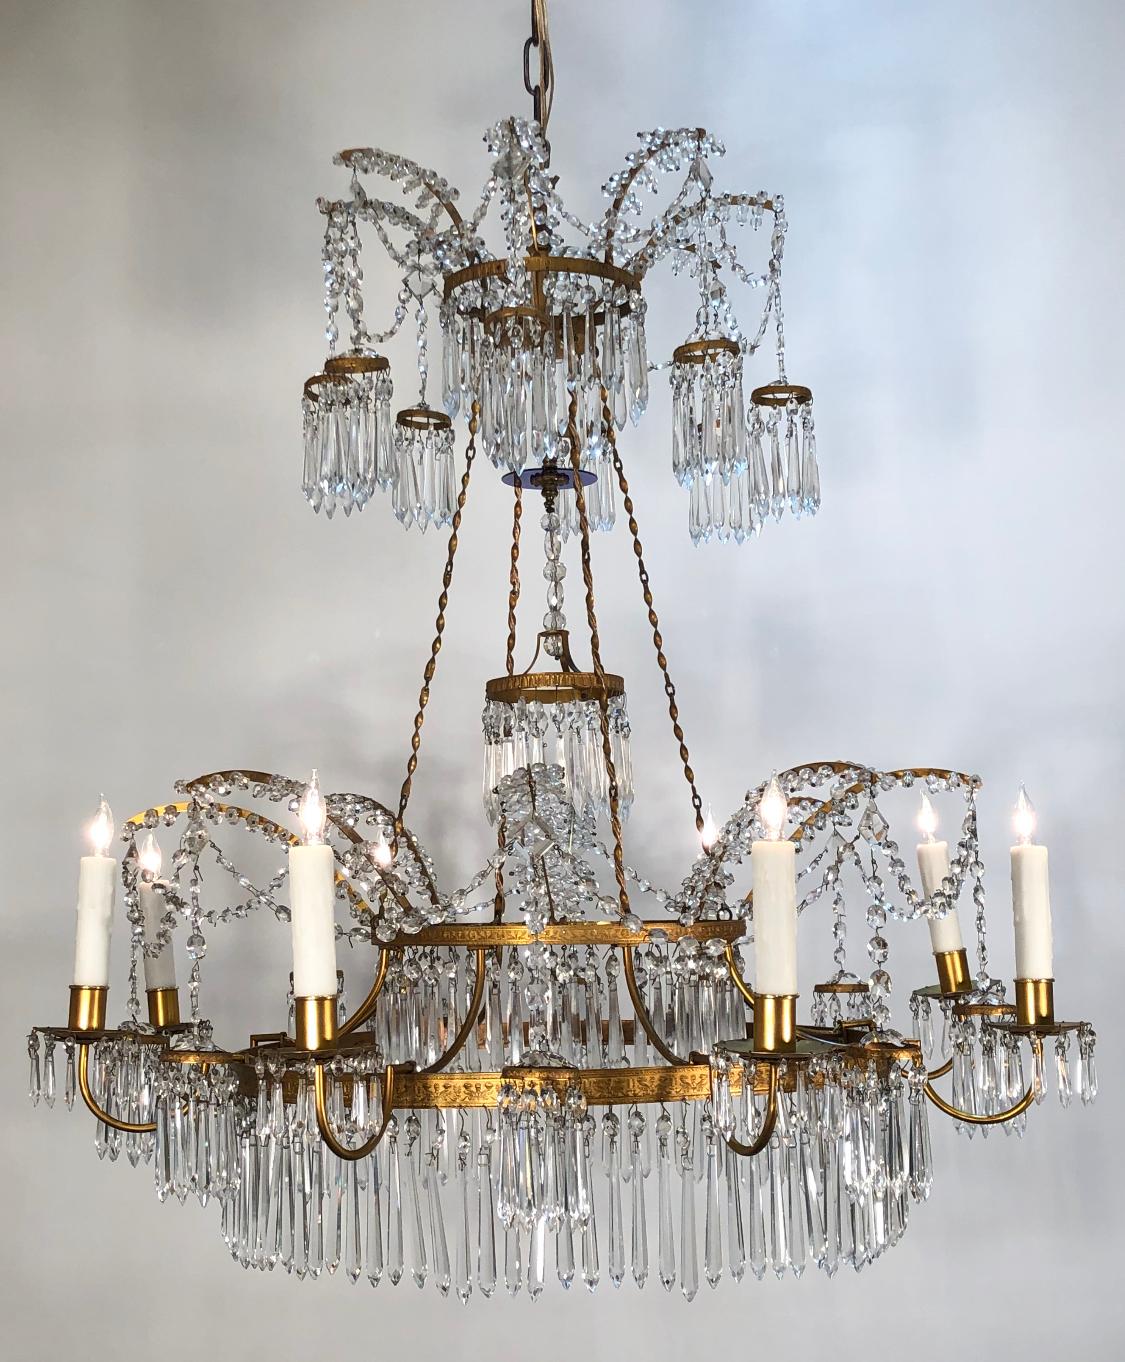 This French made elegant Russian/Baltic Empire style chandelier is doré bronze and crystal with a cobalt crystal mounted hanging center pendant having a doré bronze repousse ring hanging below. The neoclassical frame has eight lights with bronze and